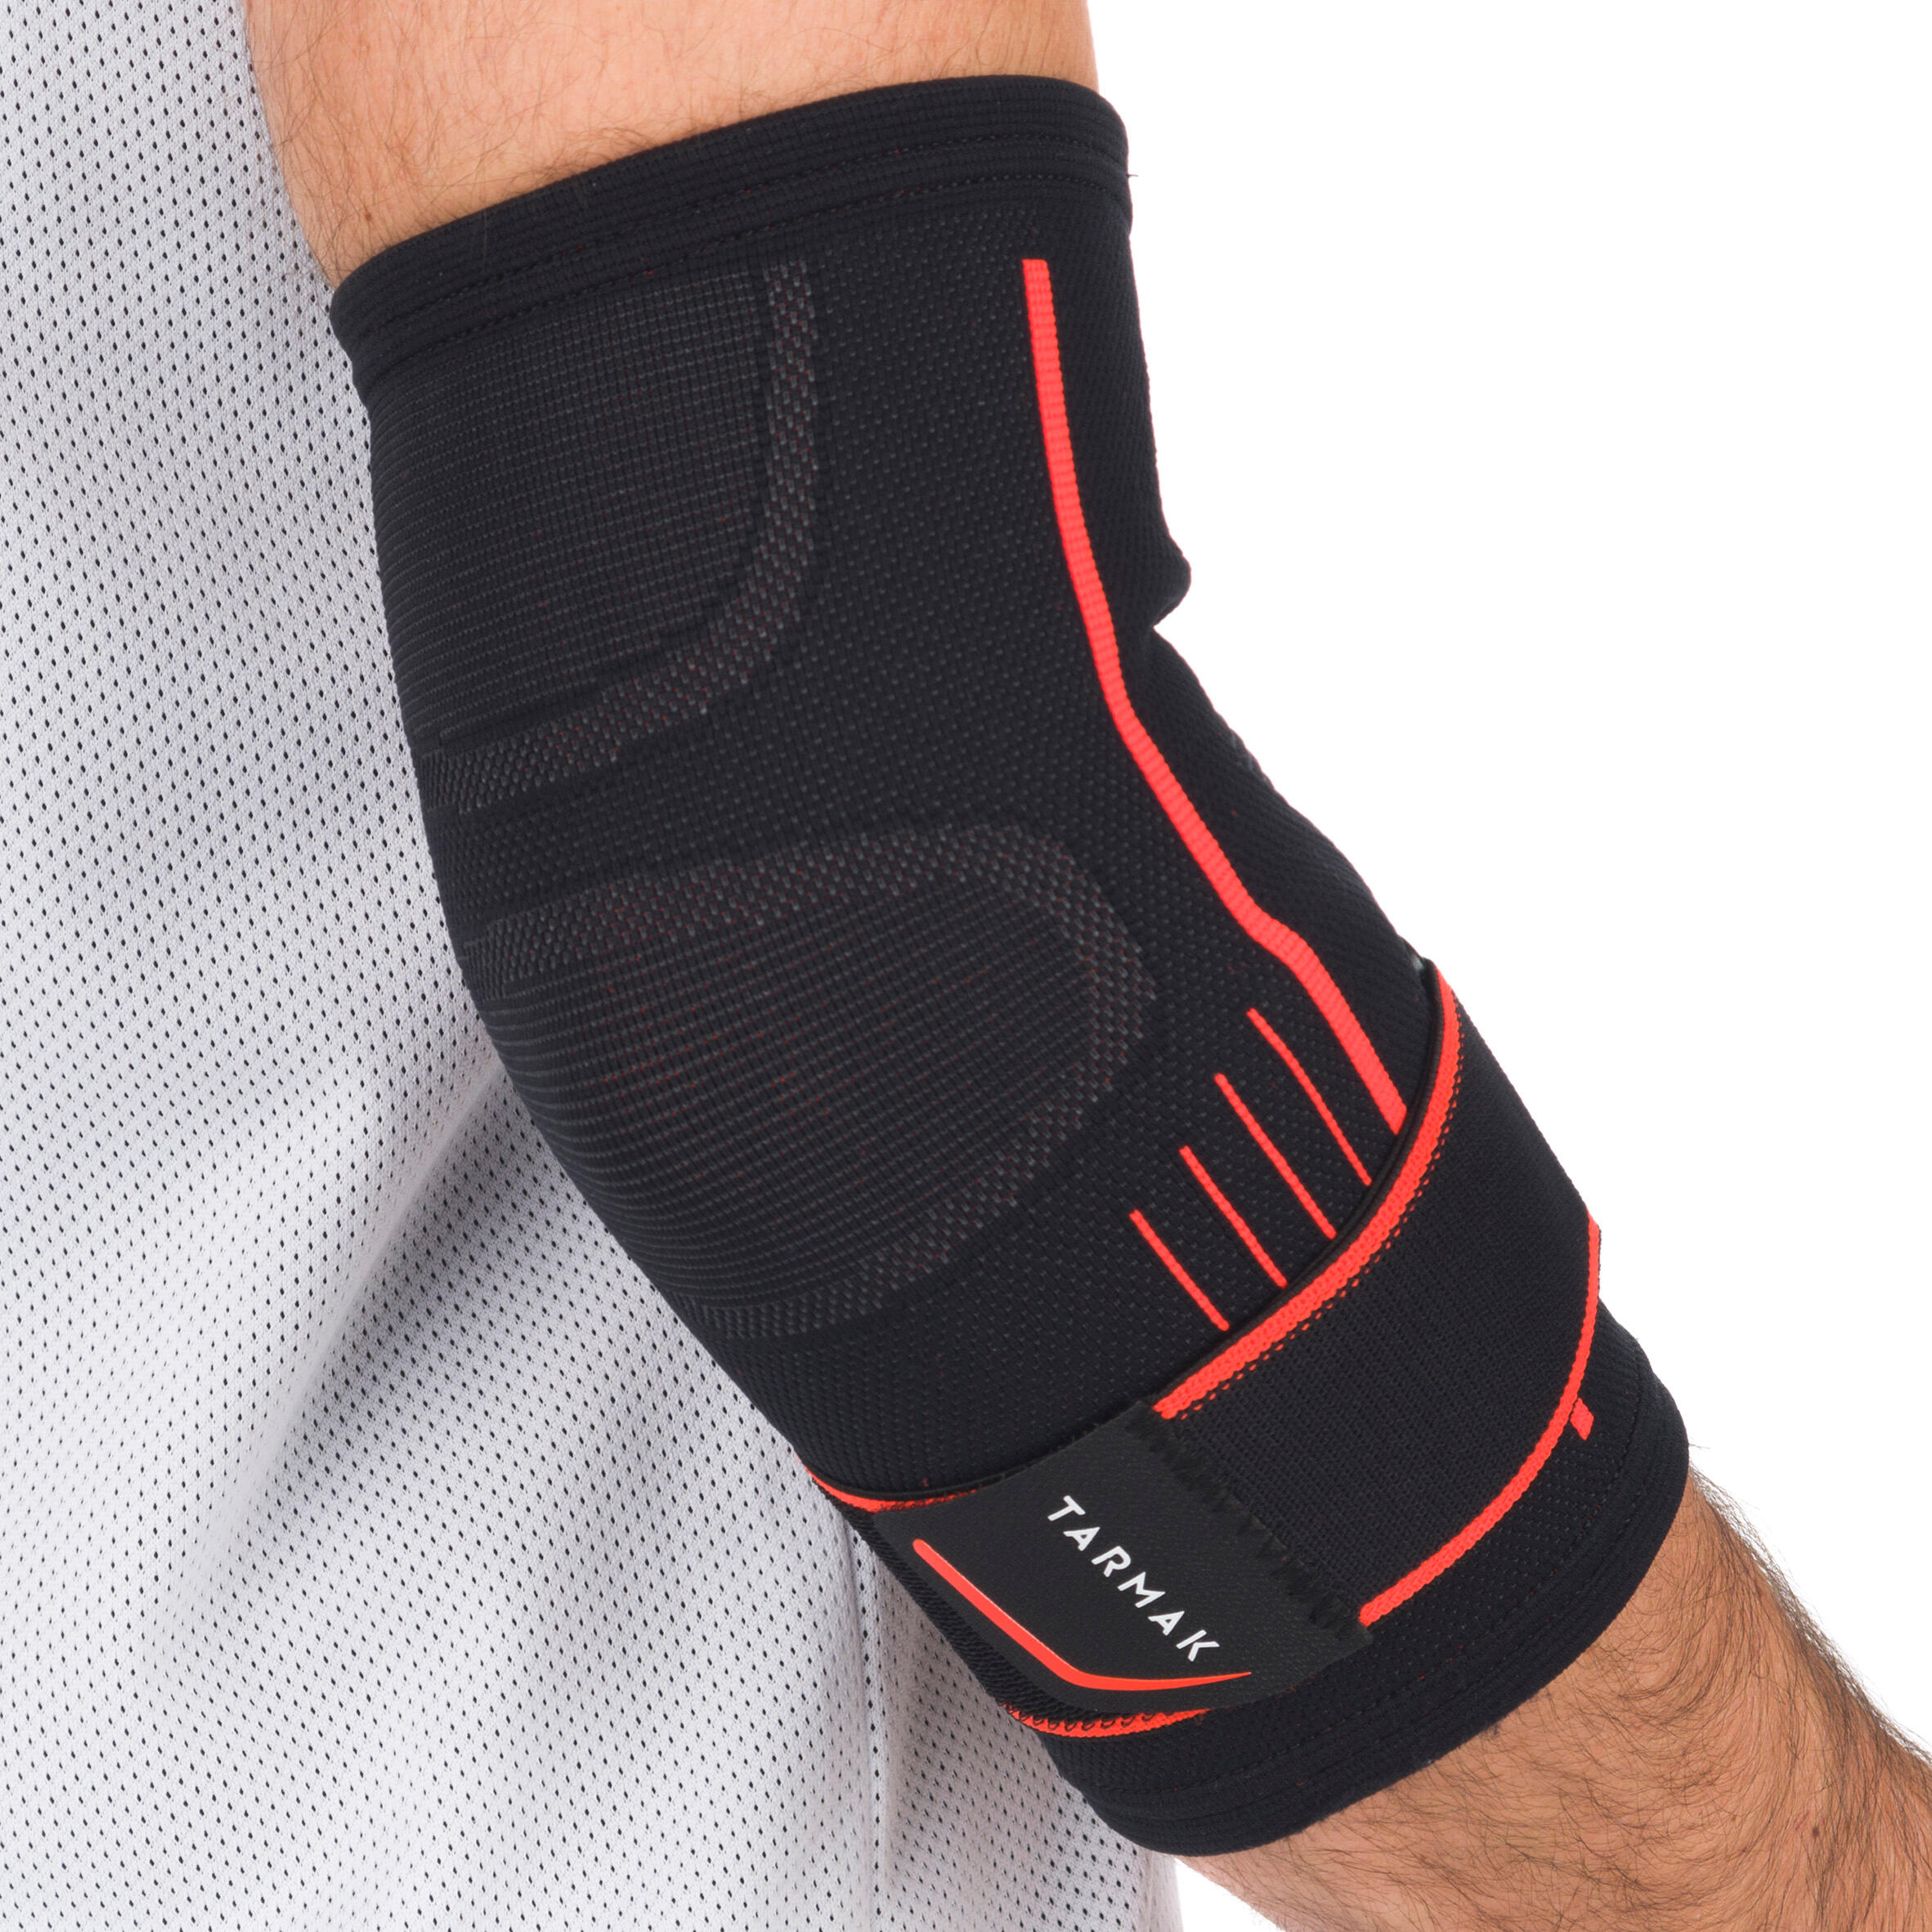 Flaresports Arm Pad Elbow Brace Protector Support Guard Padded Wrap Gym MMA 